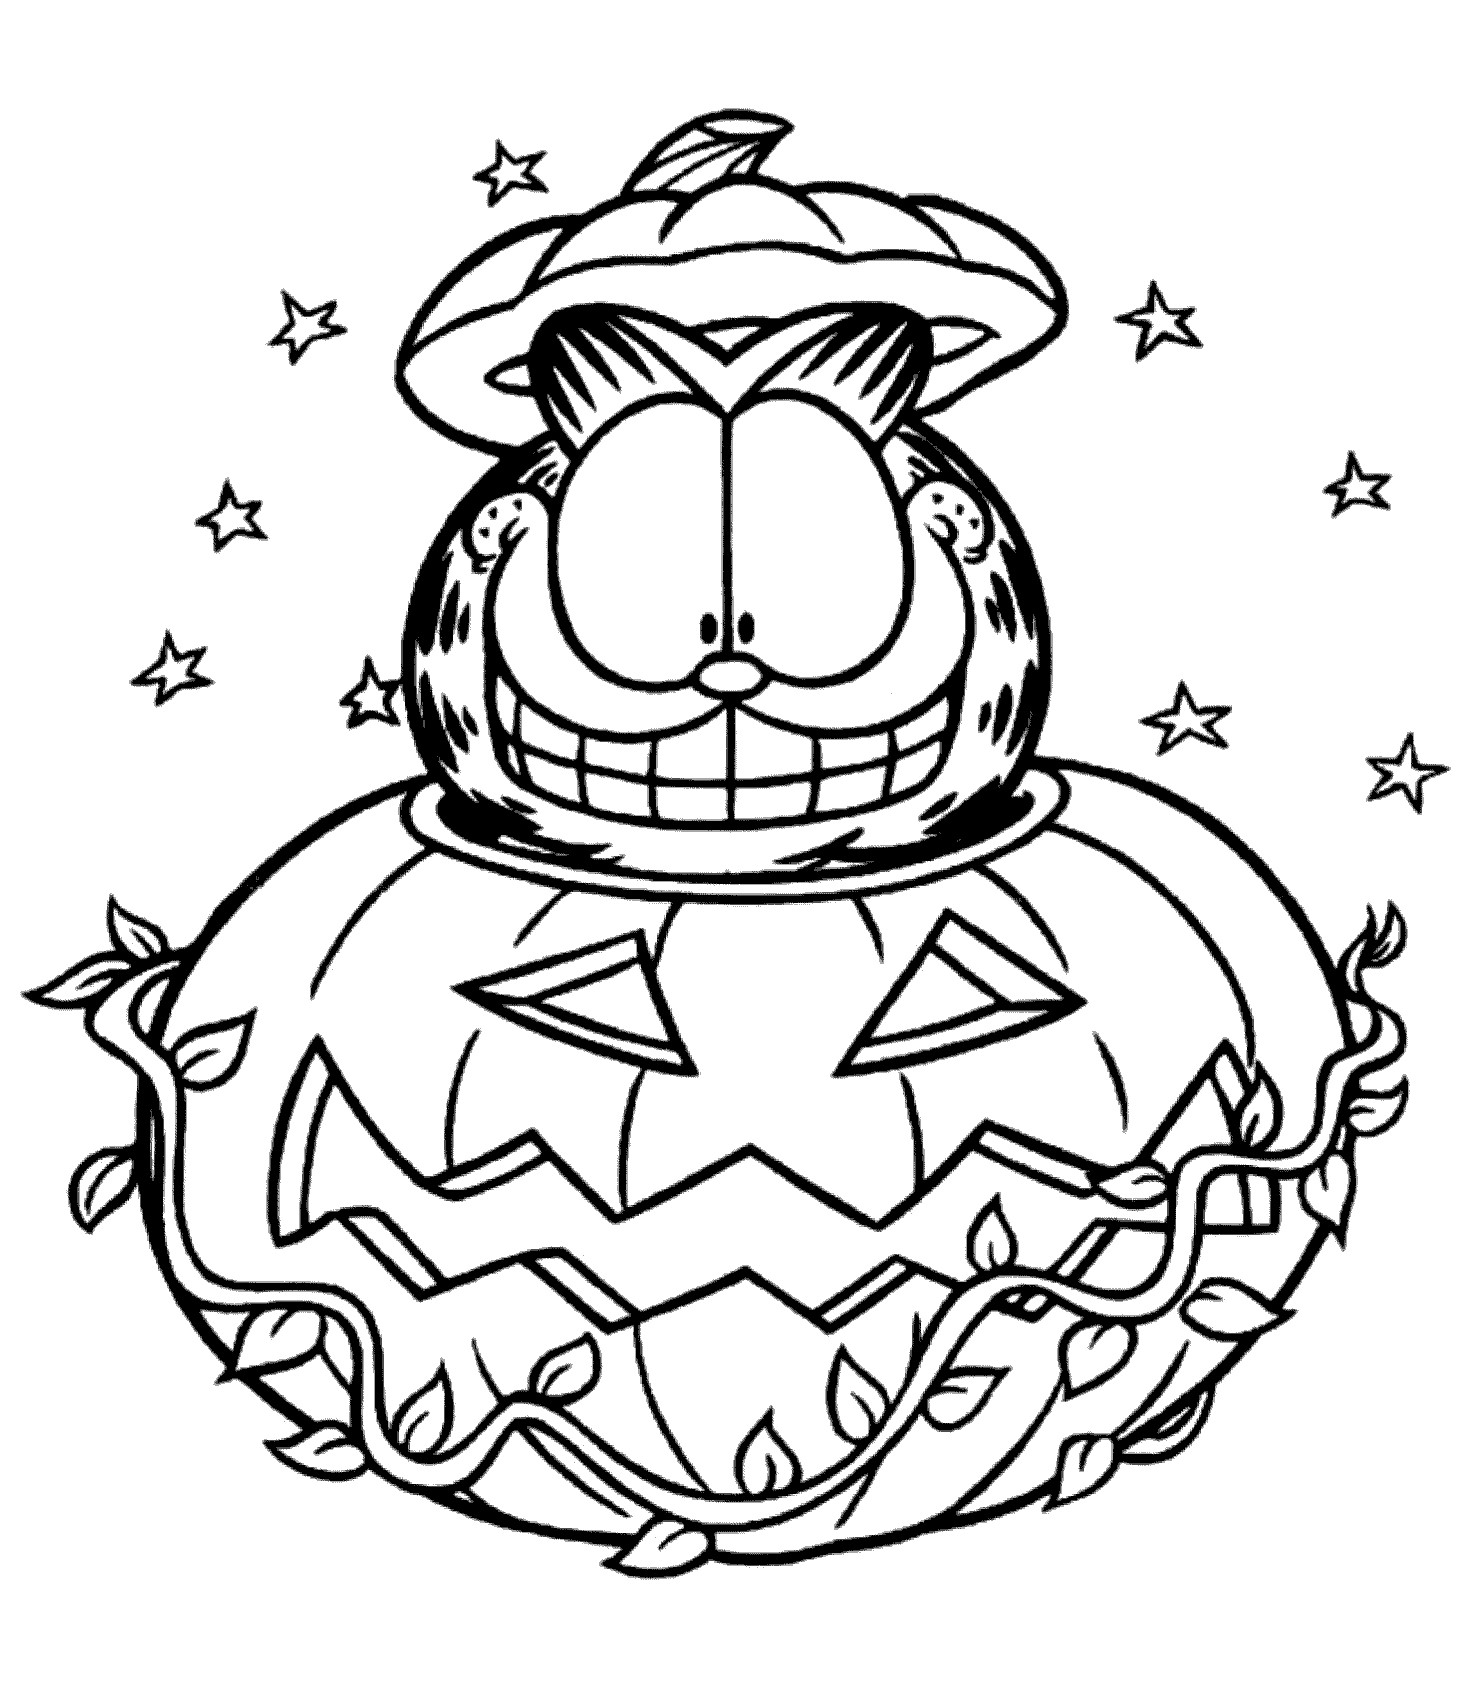 Printable Halloween Coloring Pages For Kids
 Garfield Halloween coloring pages for kids printable free